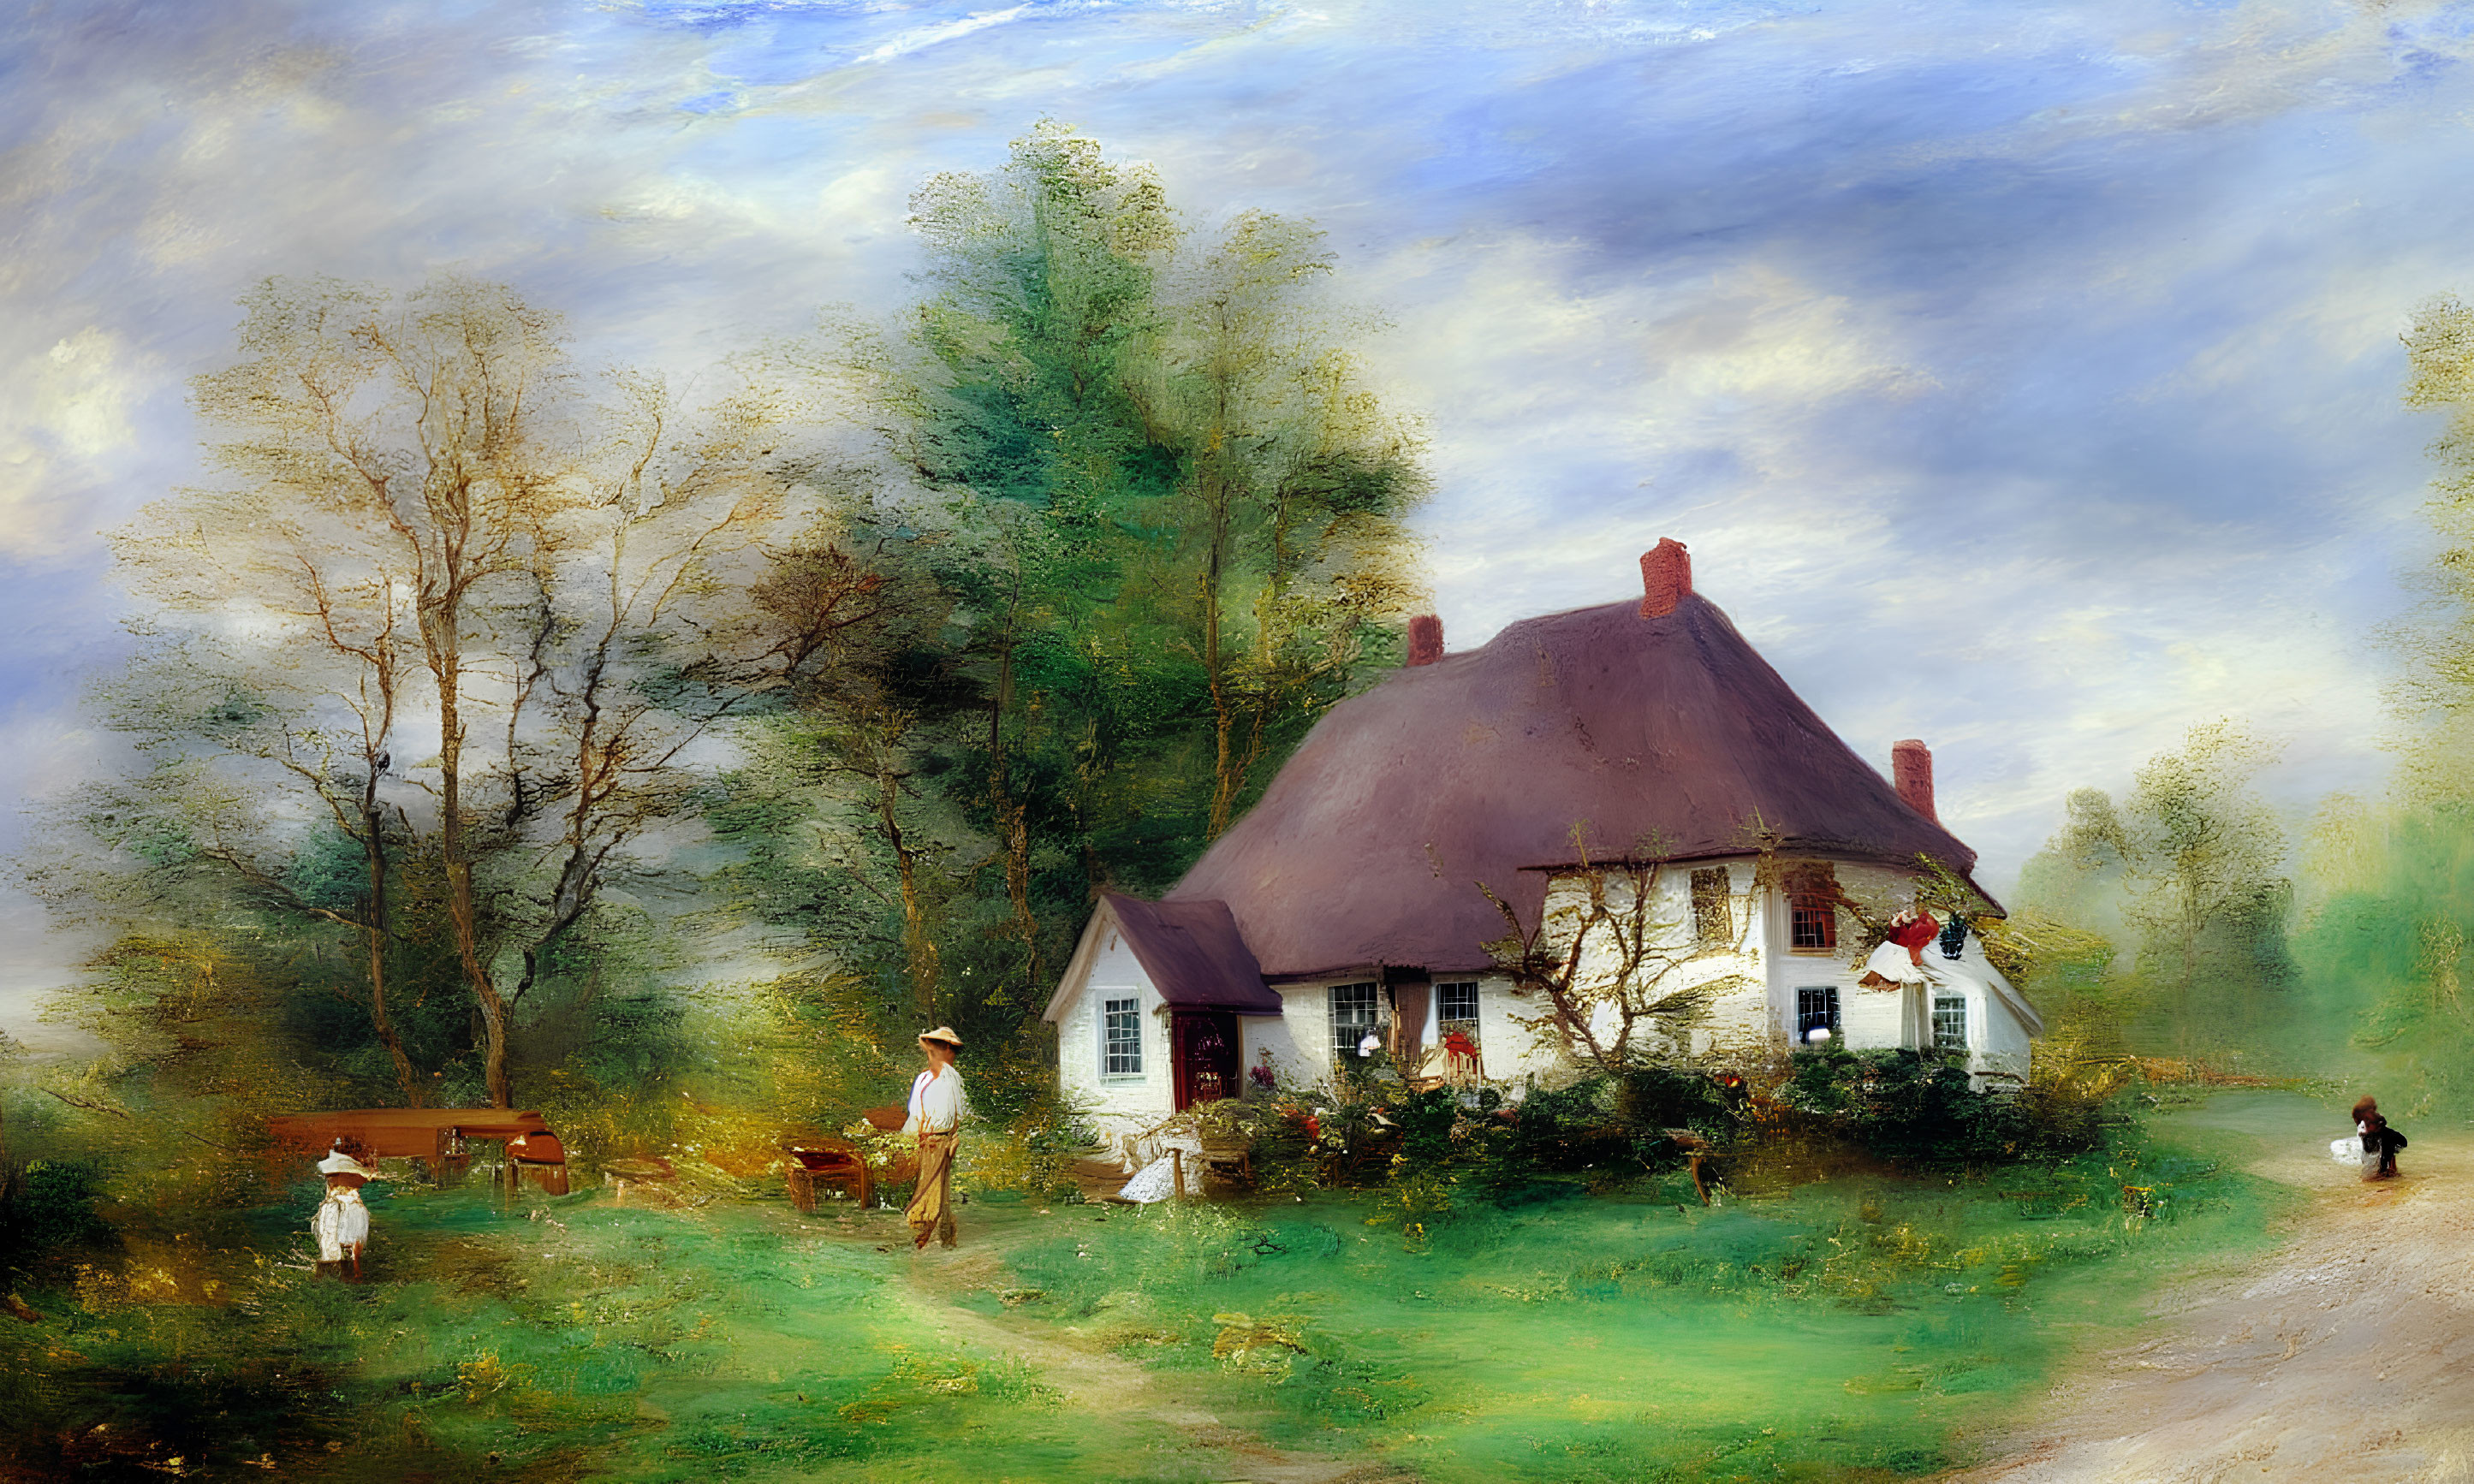 Rural landscape with thatched cottage, trees, and people in activities